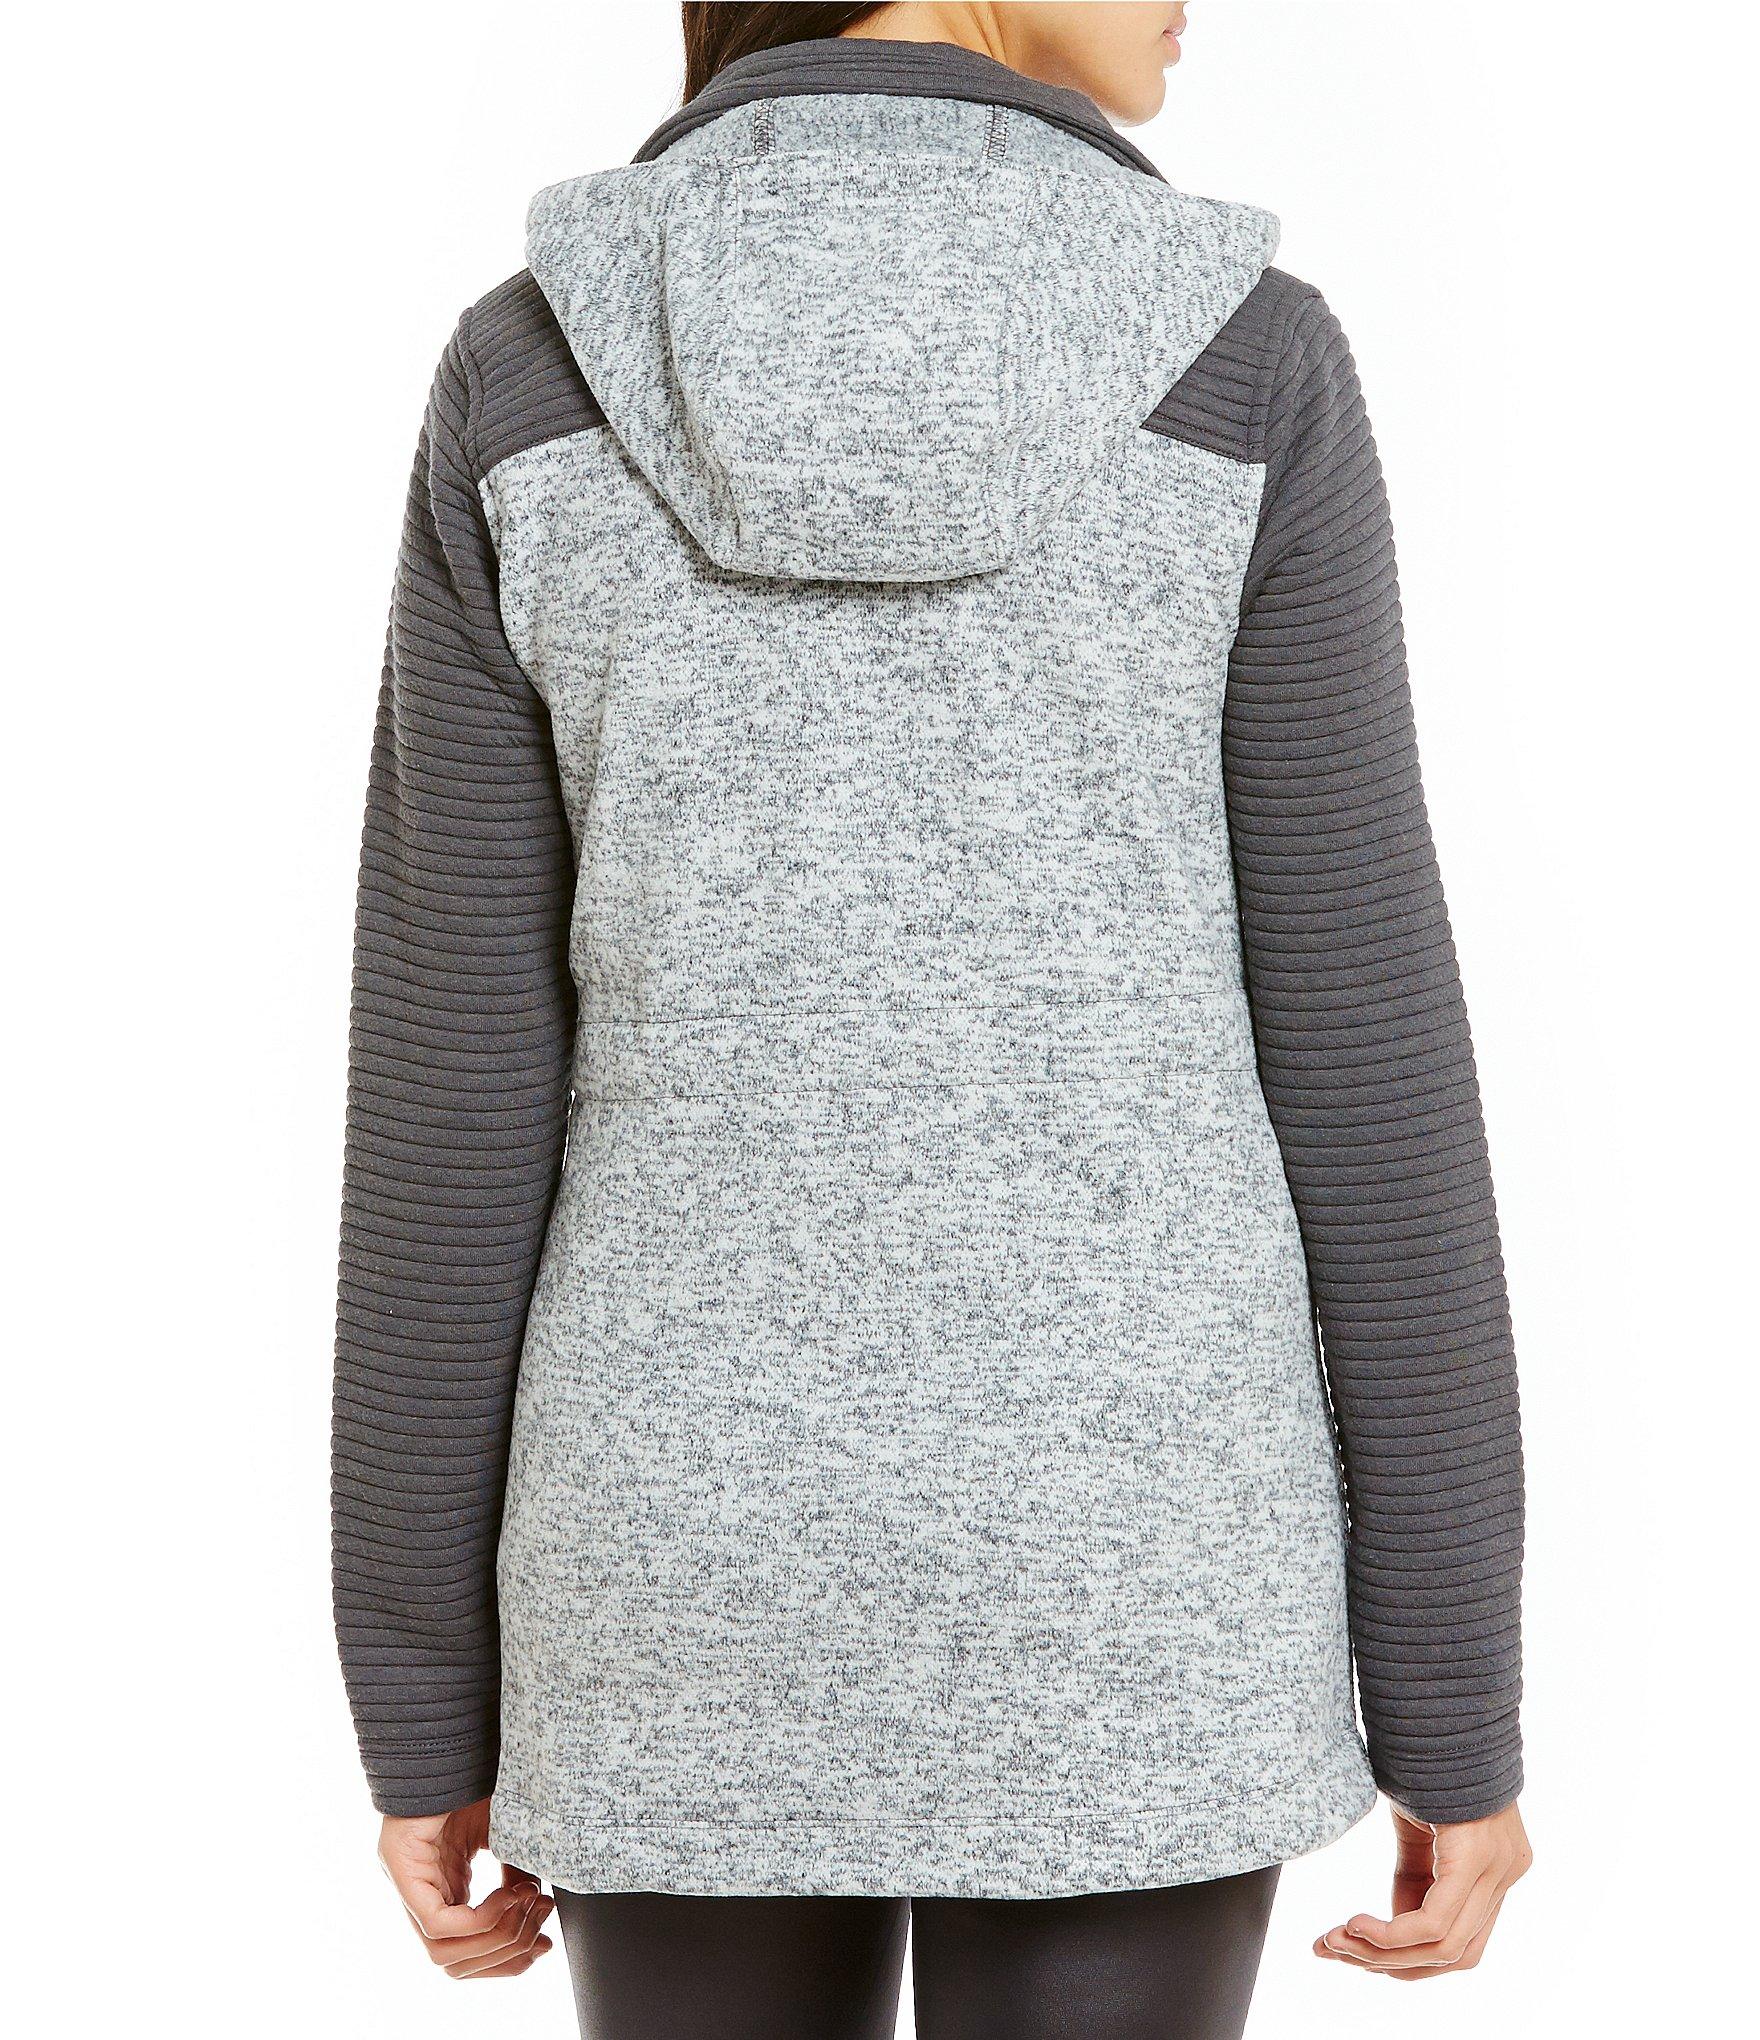 Download The North Face Fleece Indi Insulated Mock Neck Full-zip ...